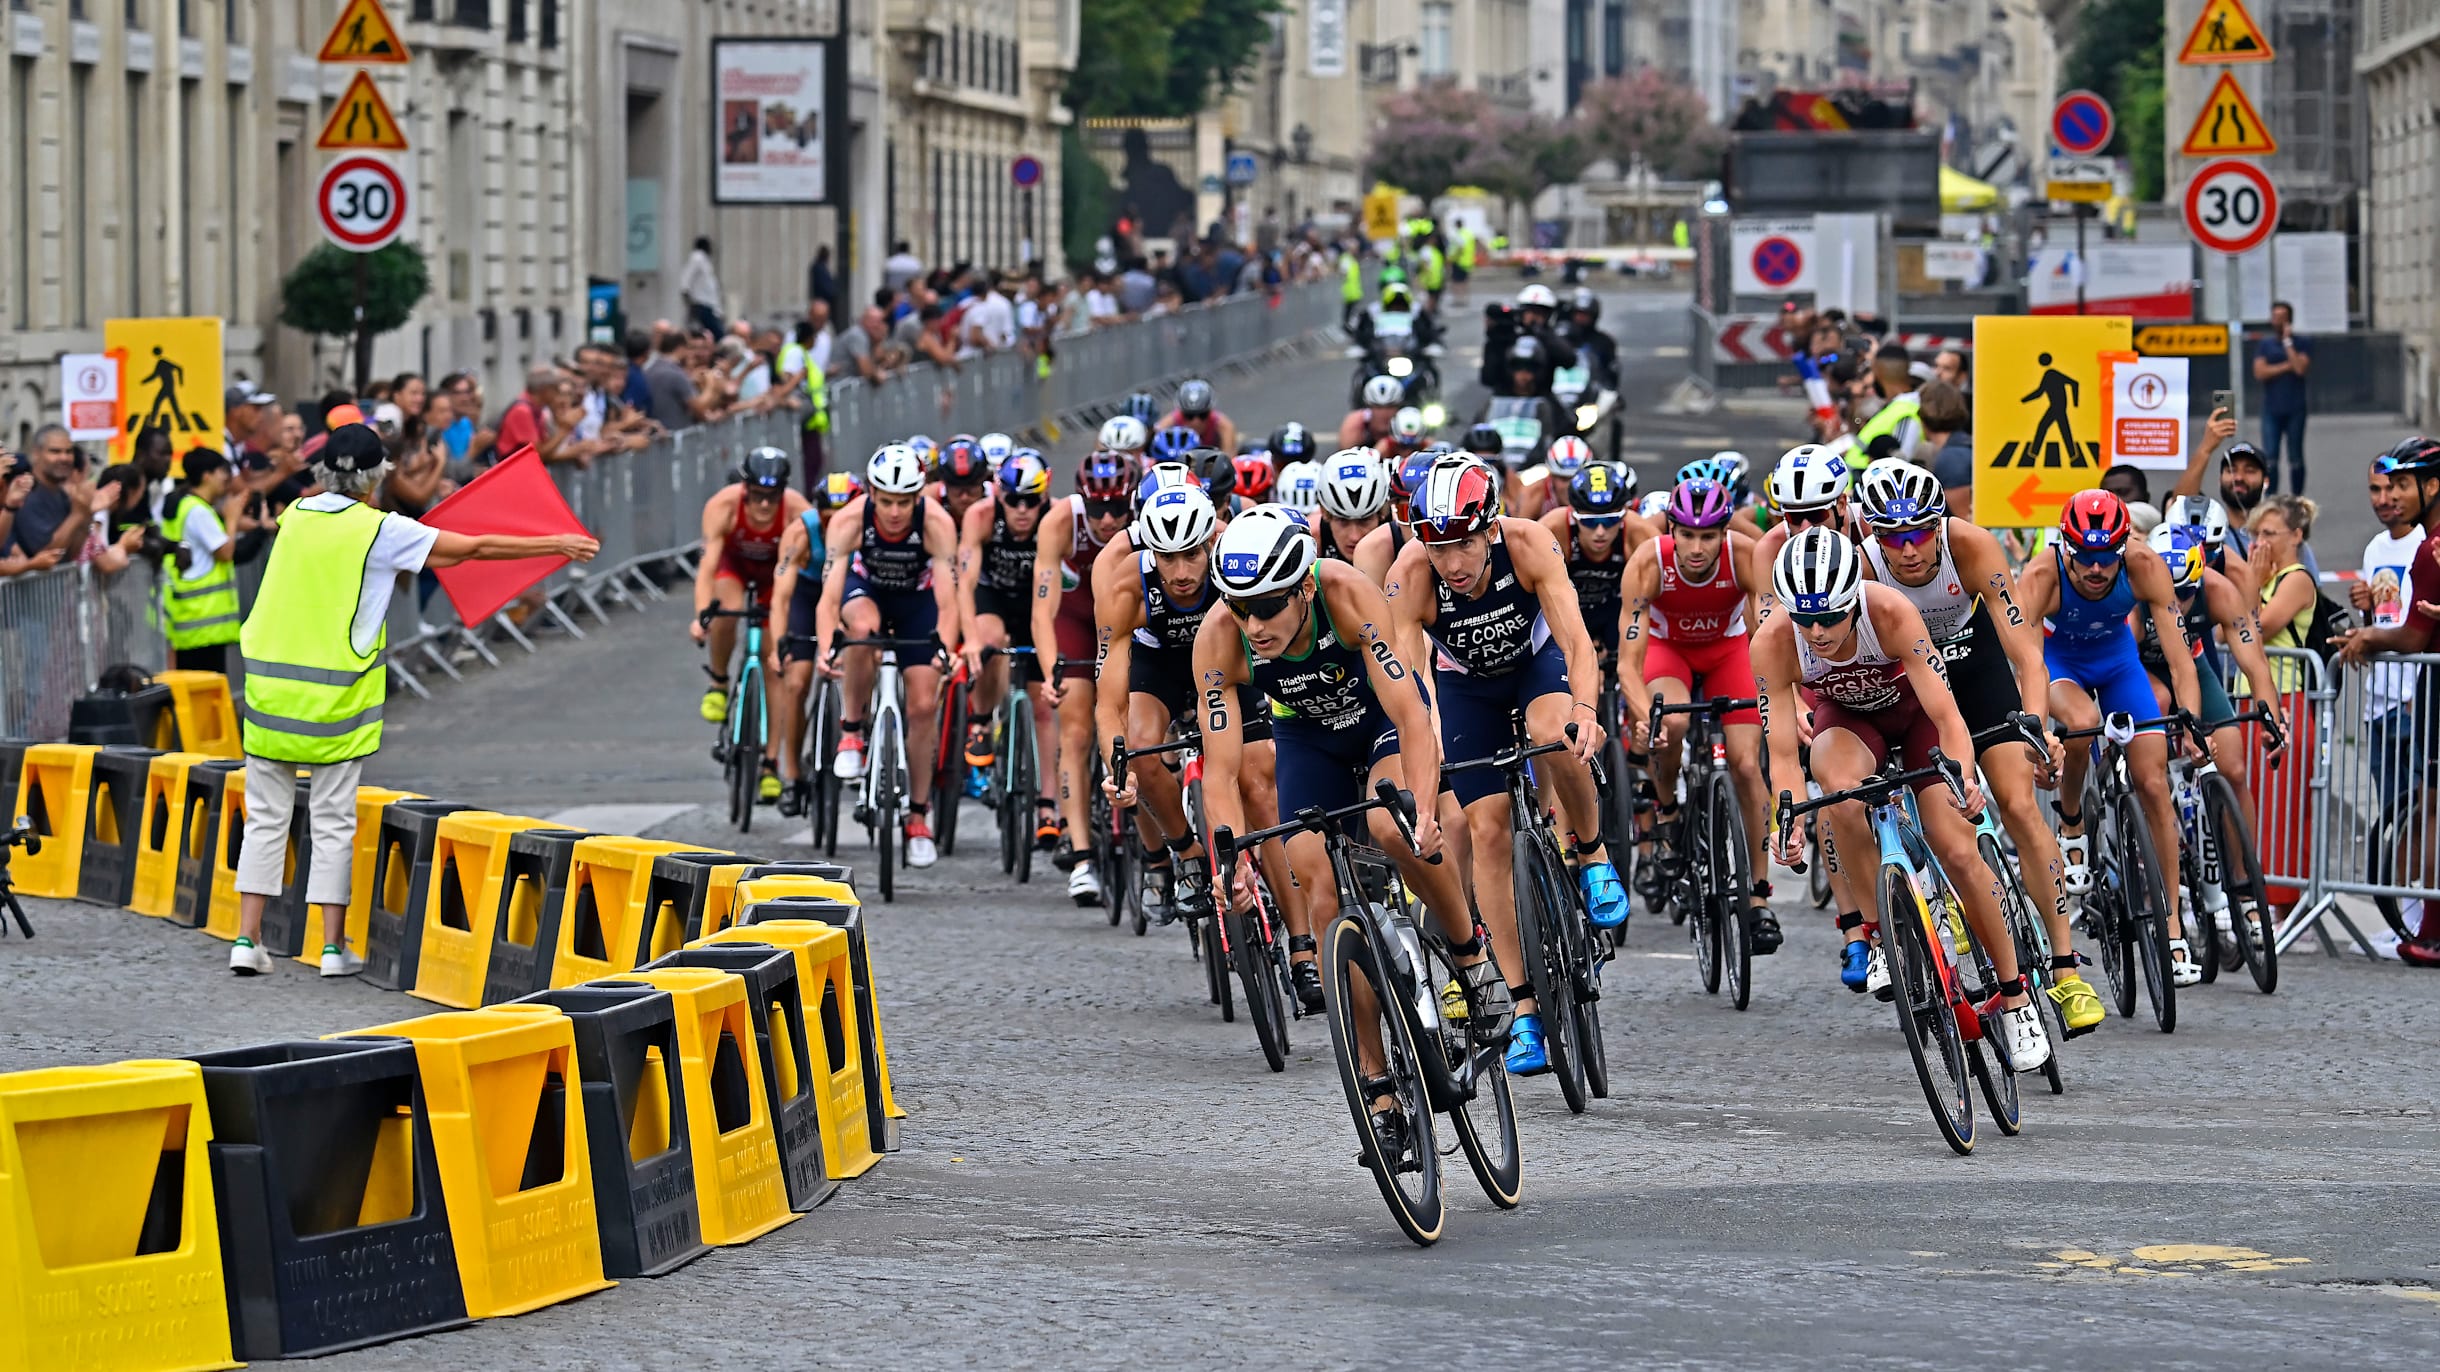 2023 World Triathlon Championship Finals Preview, schedule, stars and how to watch